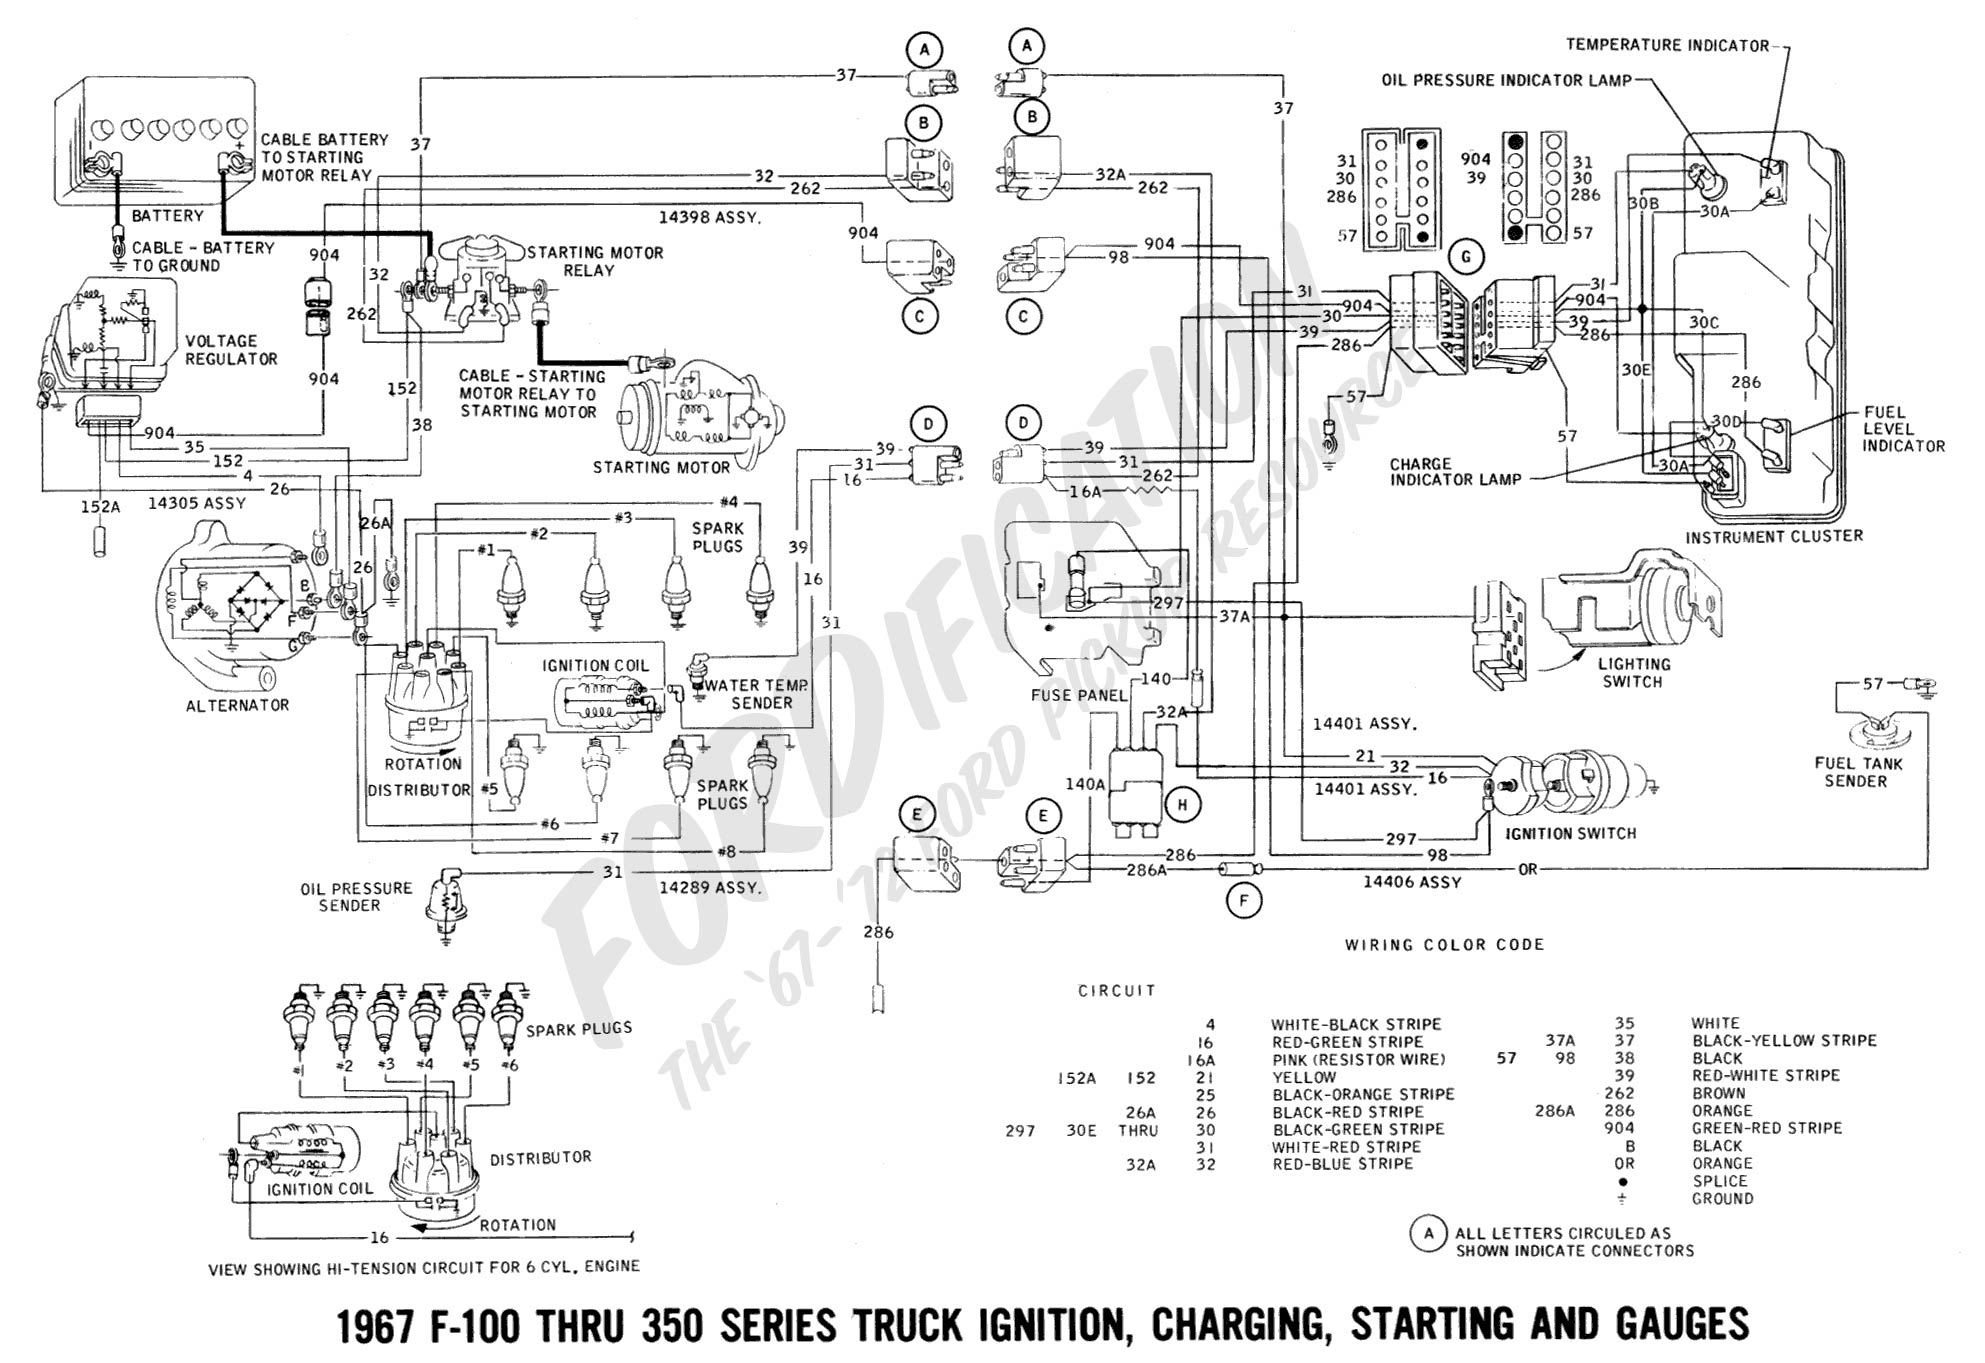 Ford Ignition Switch Wiring Diagram - Wiring Diagram Explained - Ford Wiring Diagram